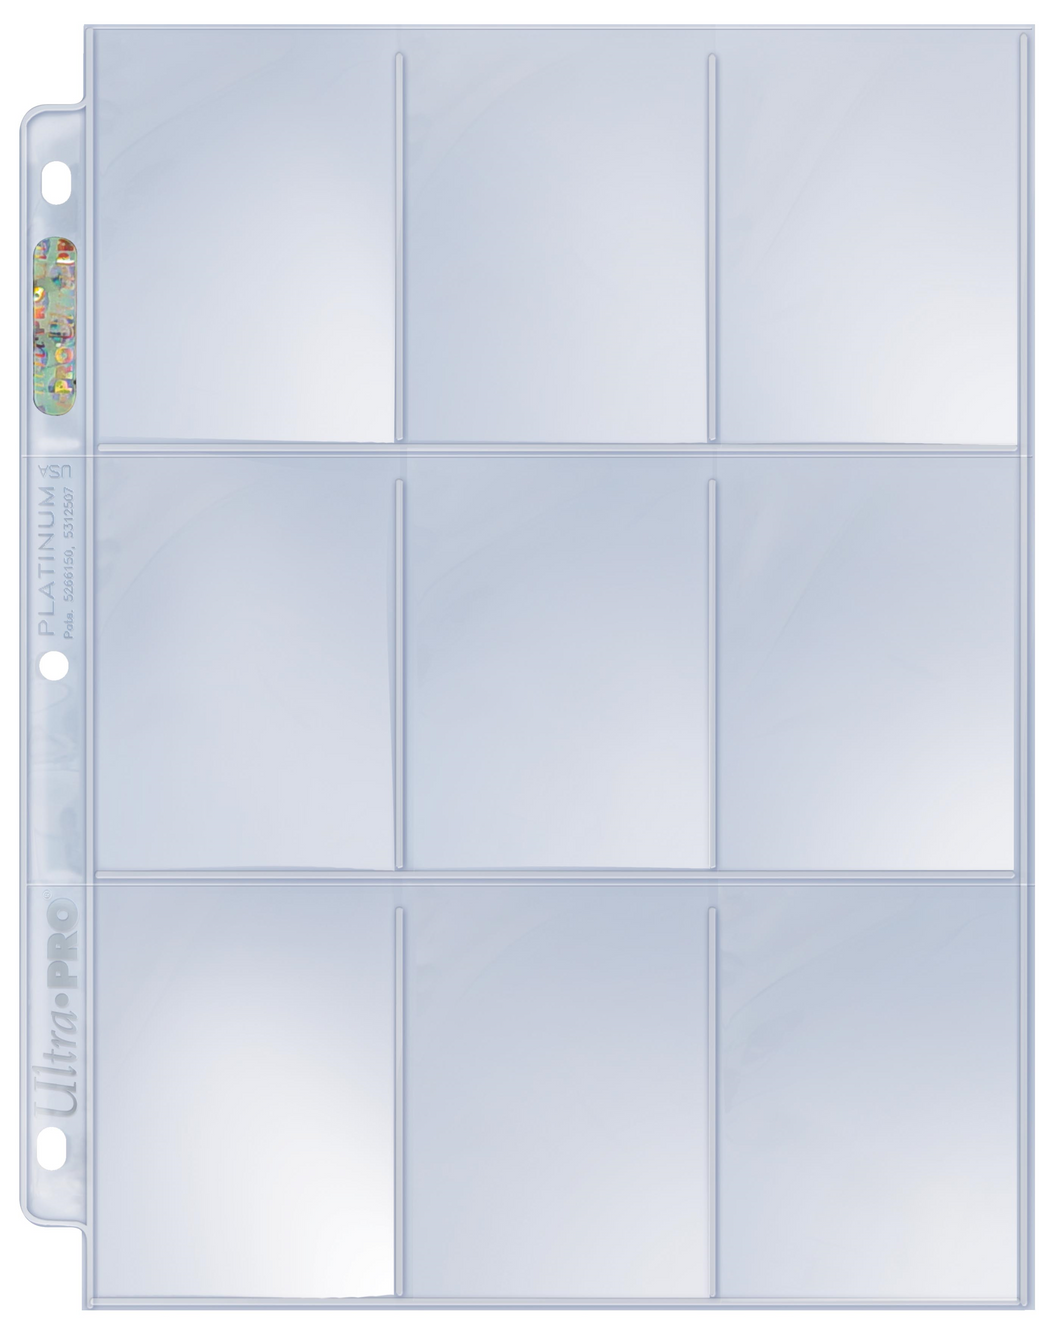 9-Pocket Page for Standard Size Cards Pack of 10